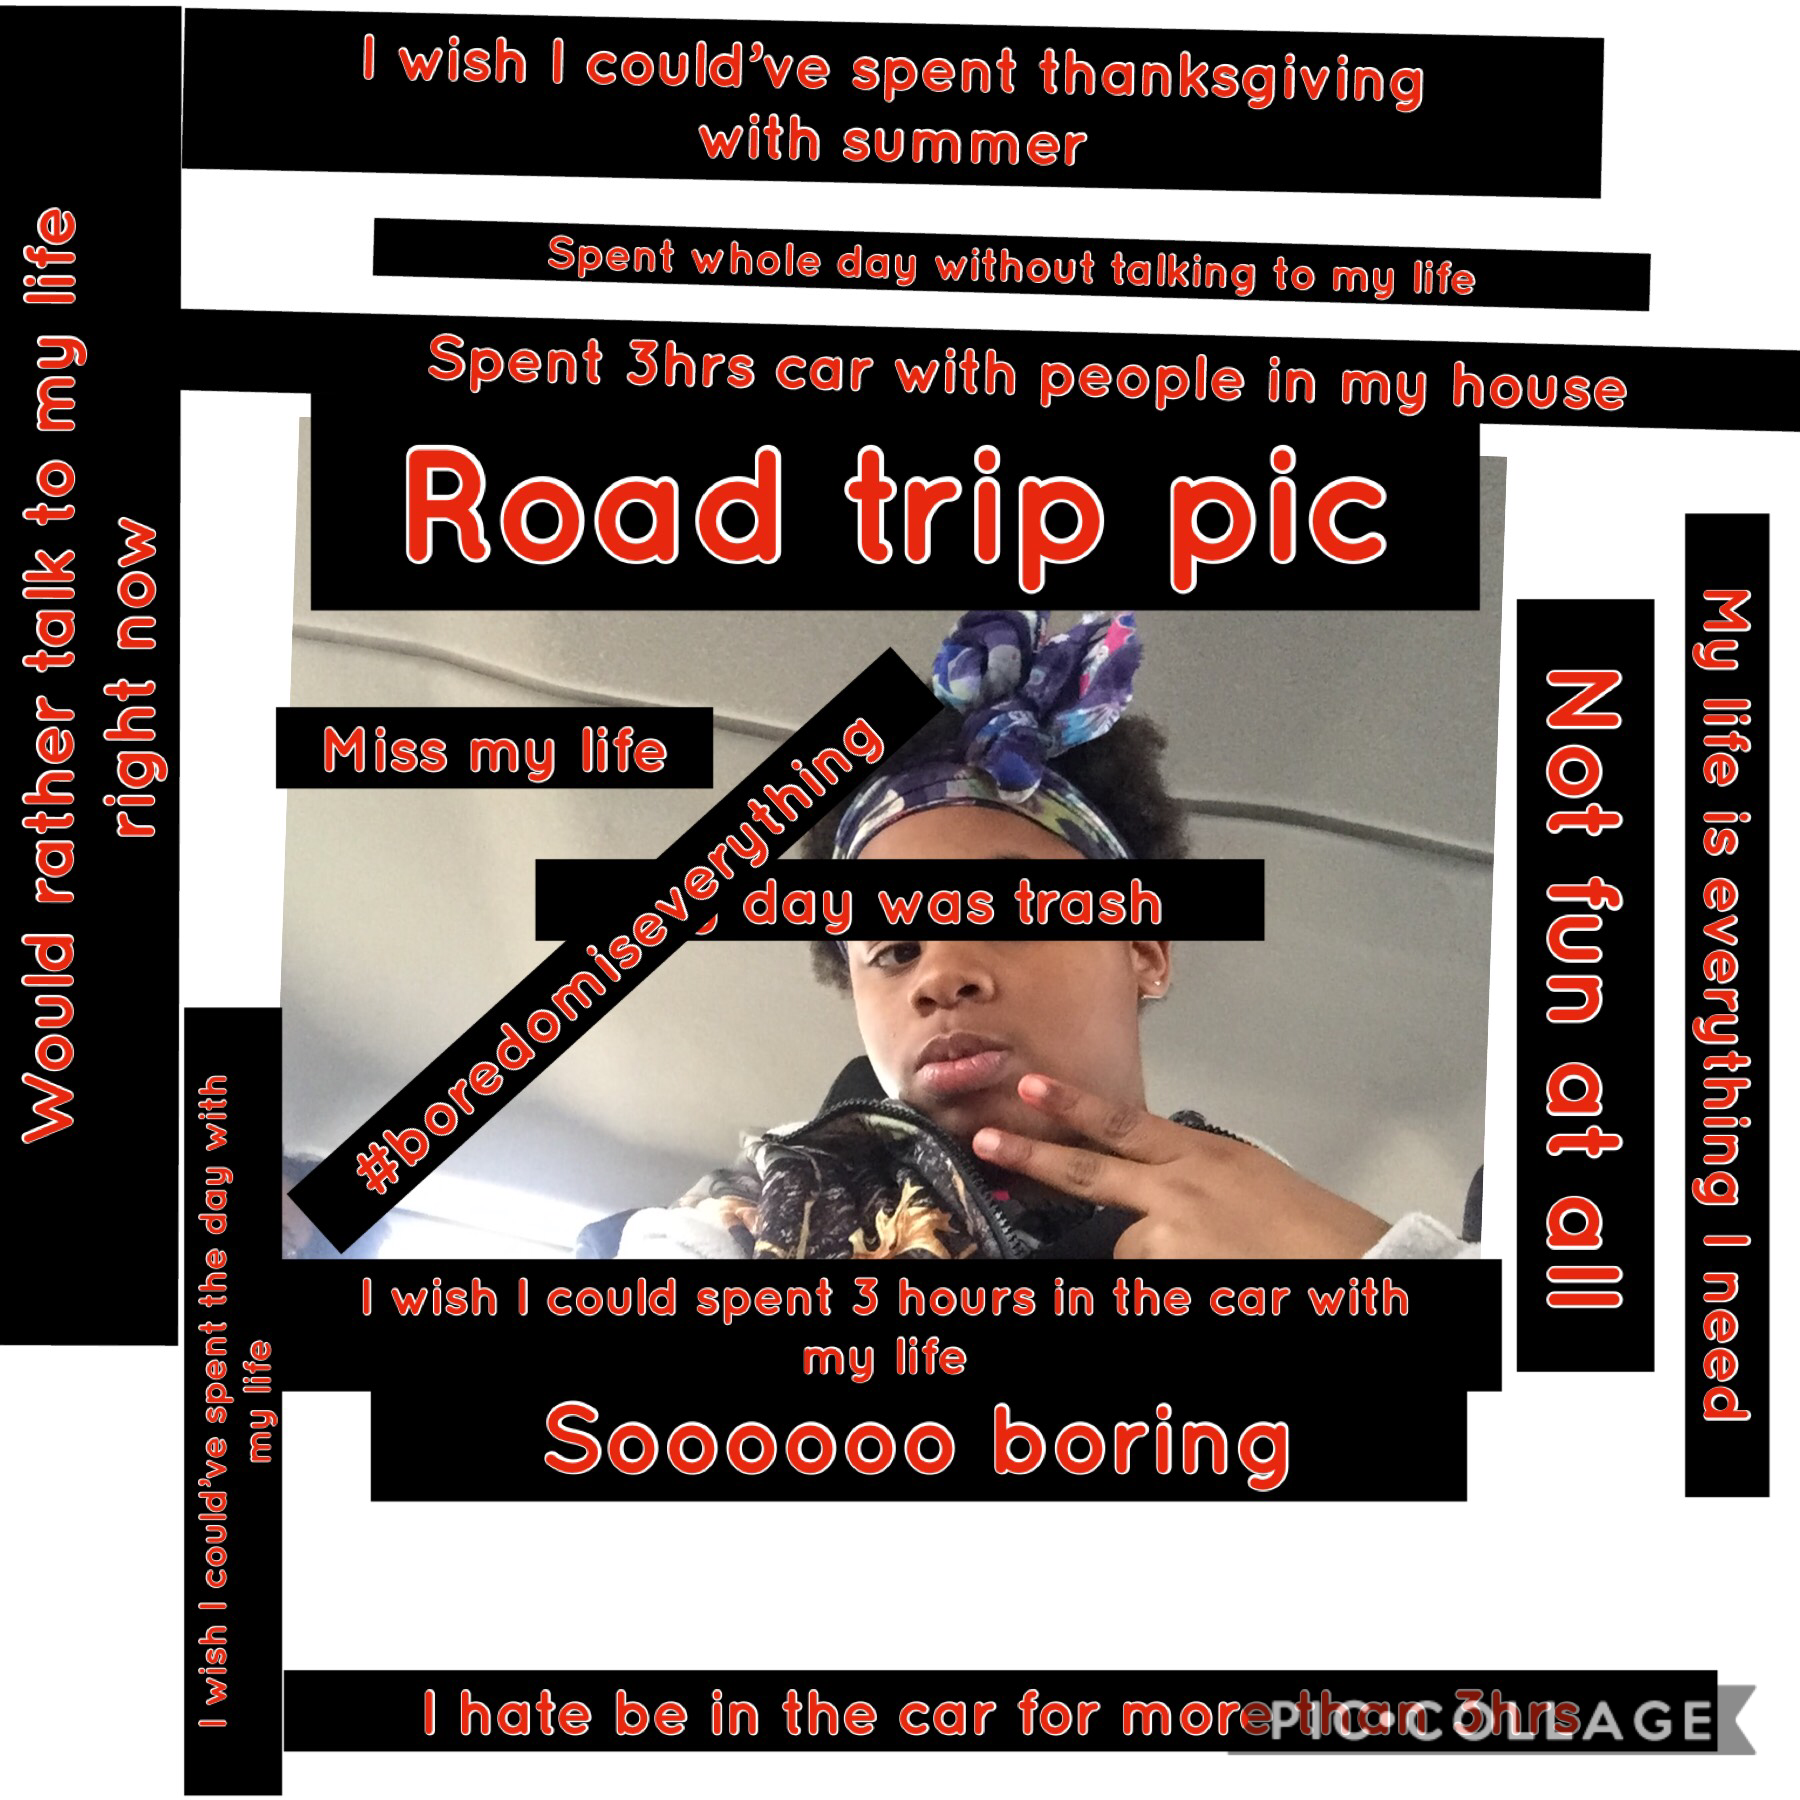 My road trip
On thanksgiving 
Sooooooooooooooooooooooooooooooooooooooooooooooooooooo boring